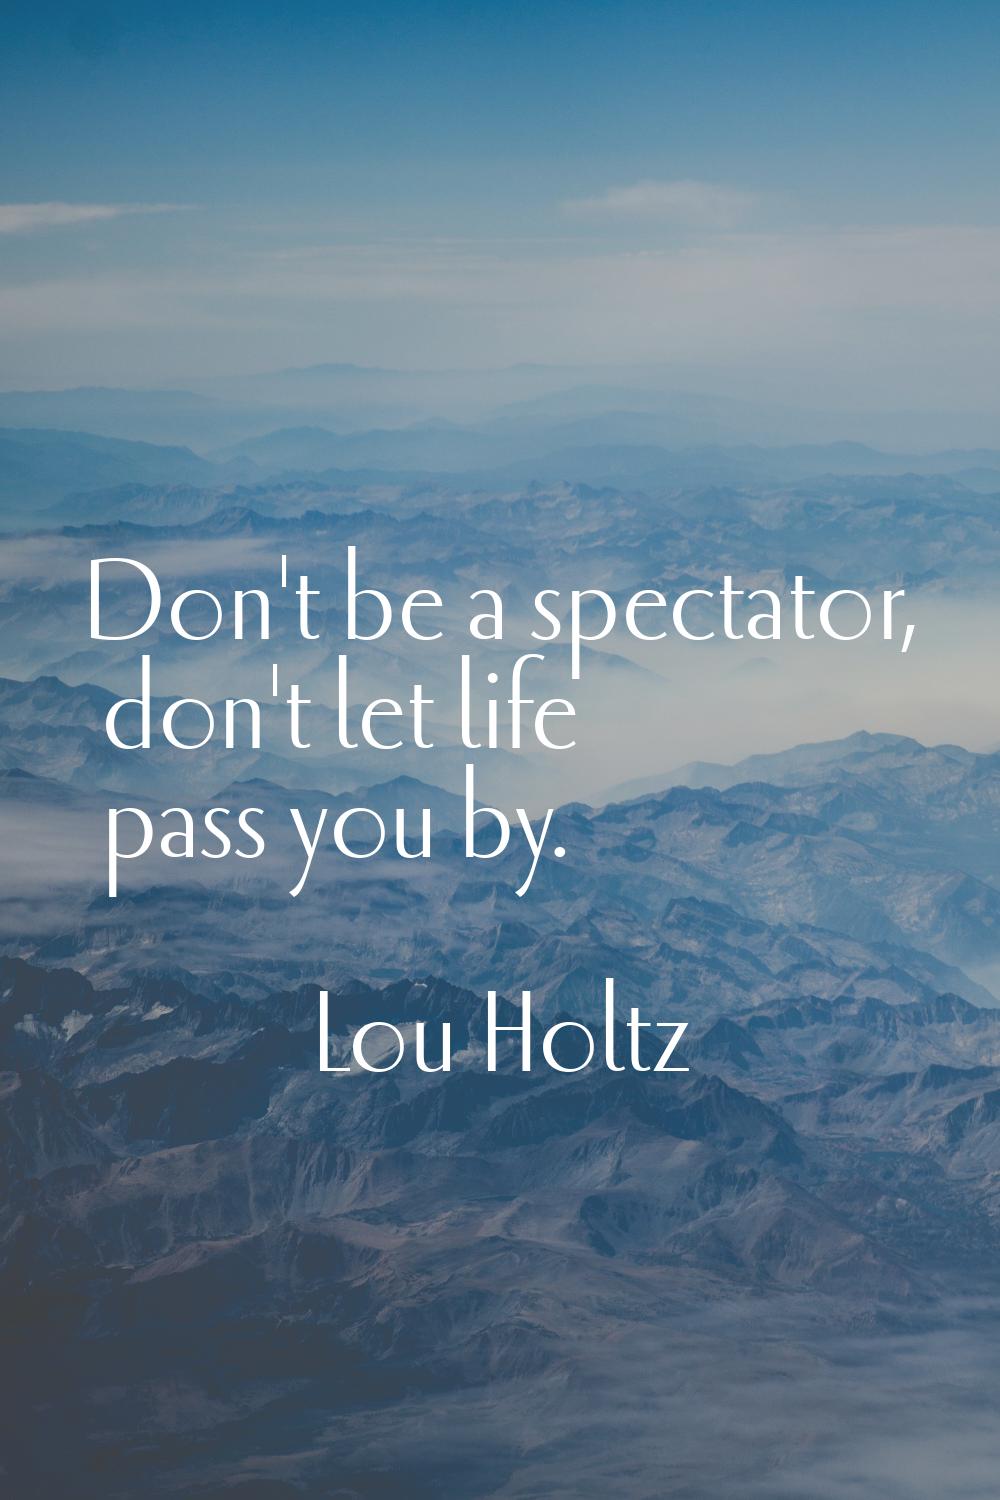 Don't be a spectator, don't let life pass you by.